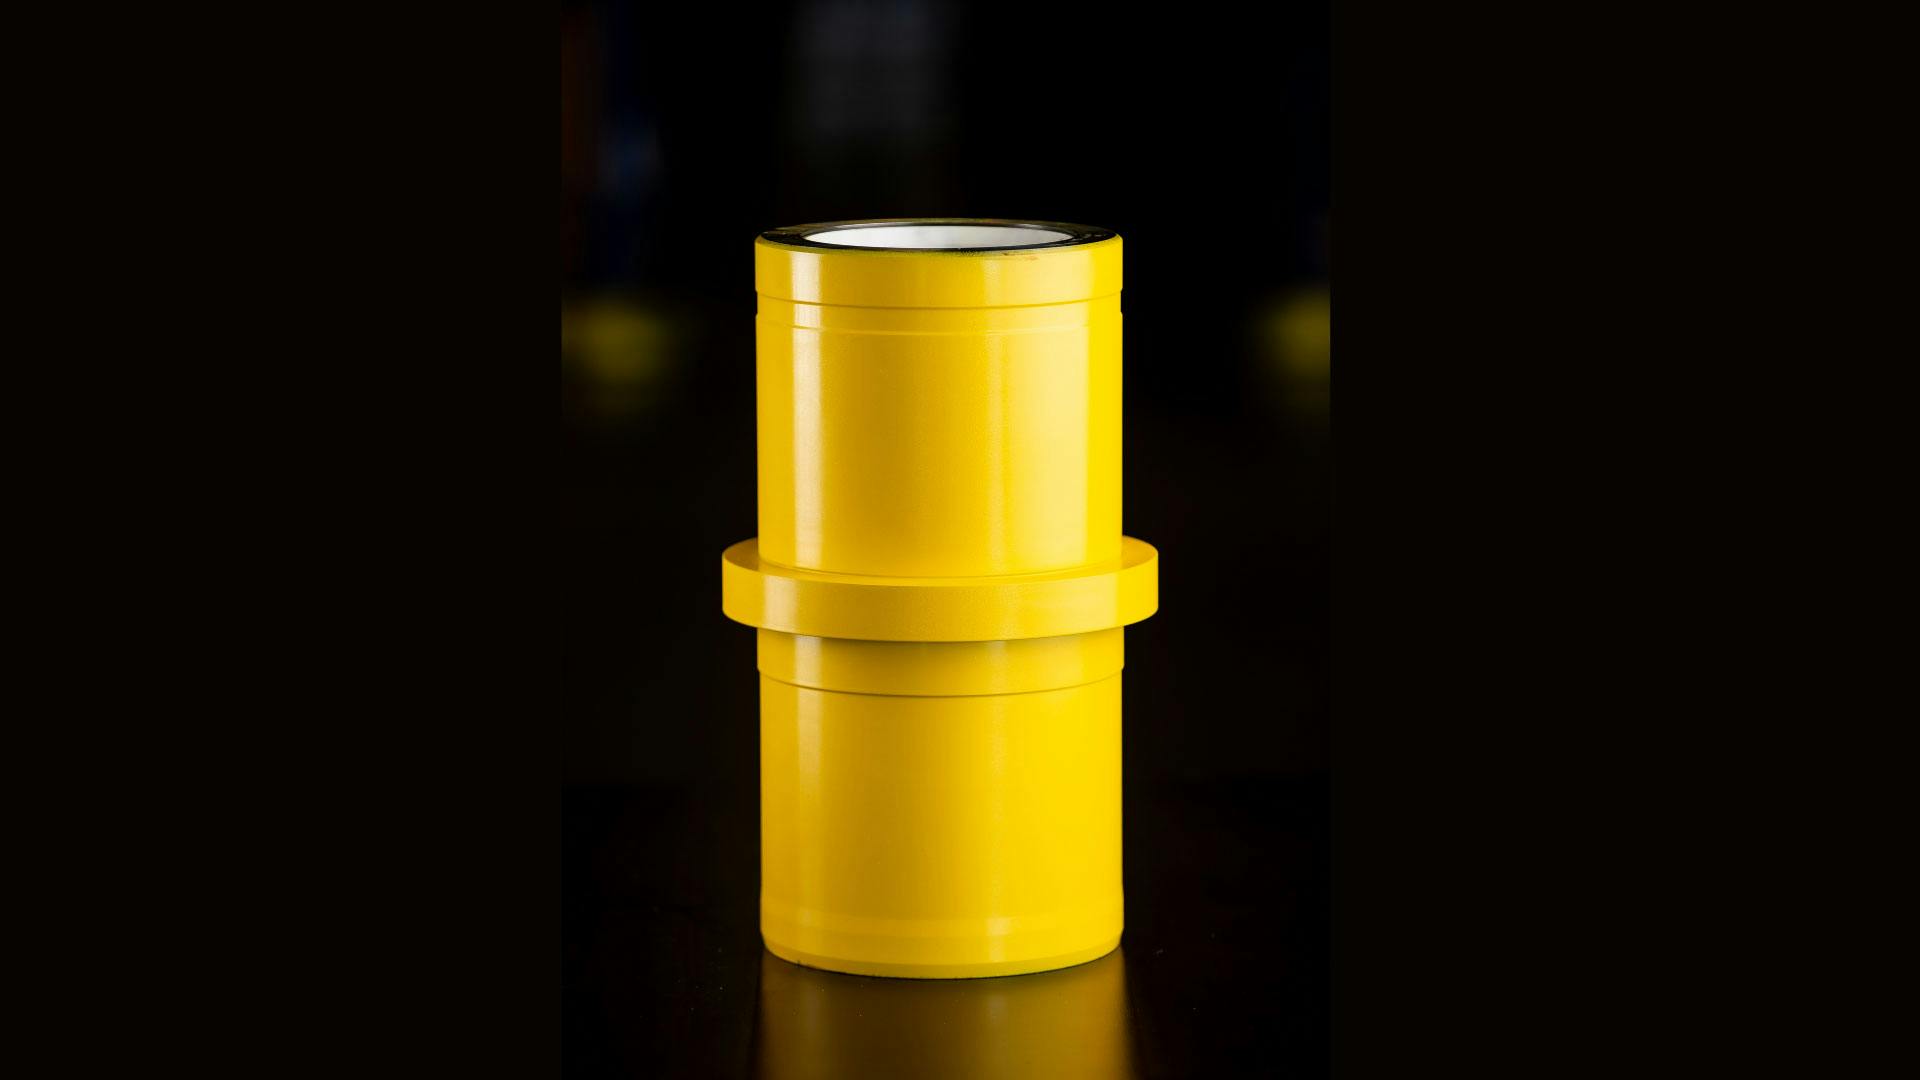 Single shot of a yellow ceramic liner with a black background